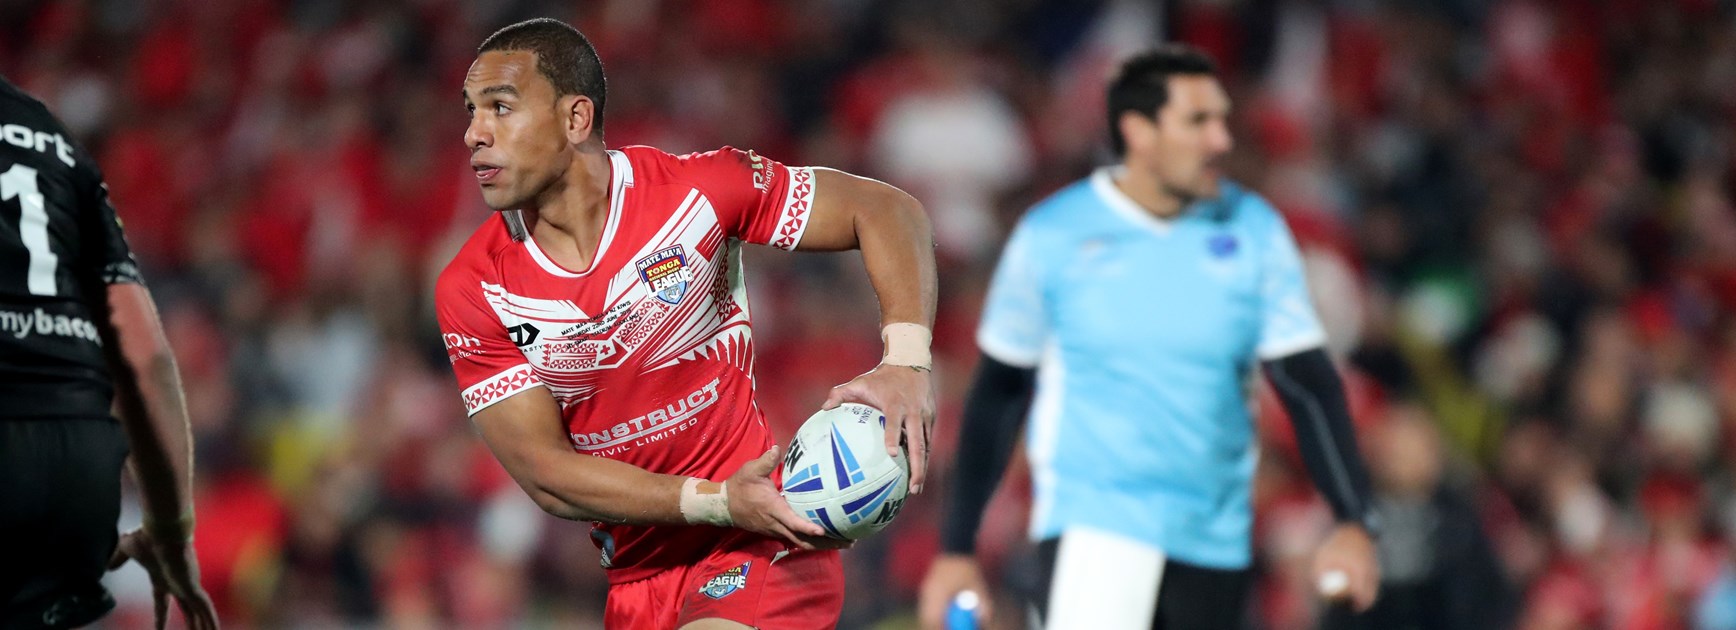 Will Hopoate passes for Tonga against New Zealand in June.